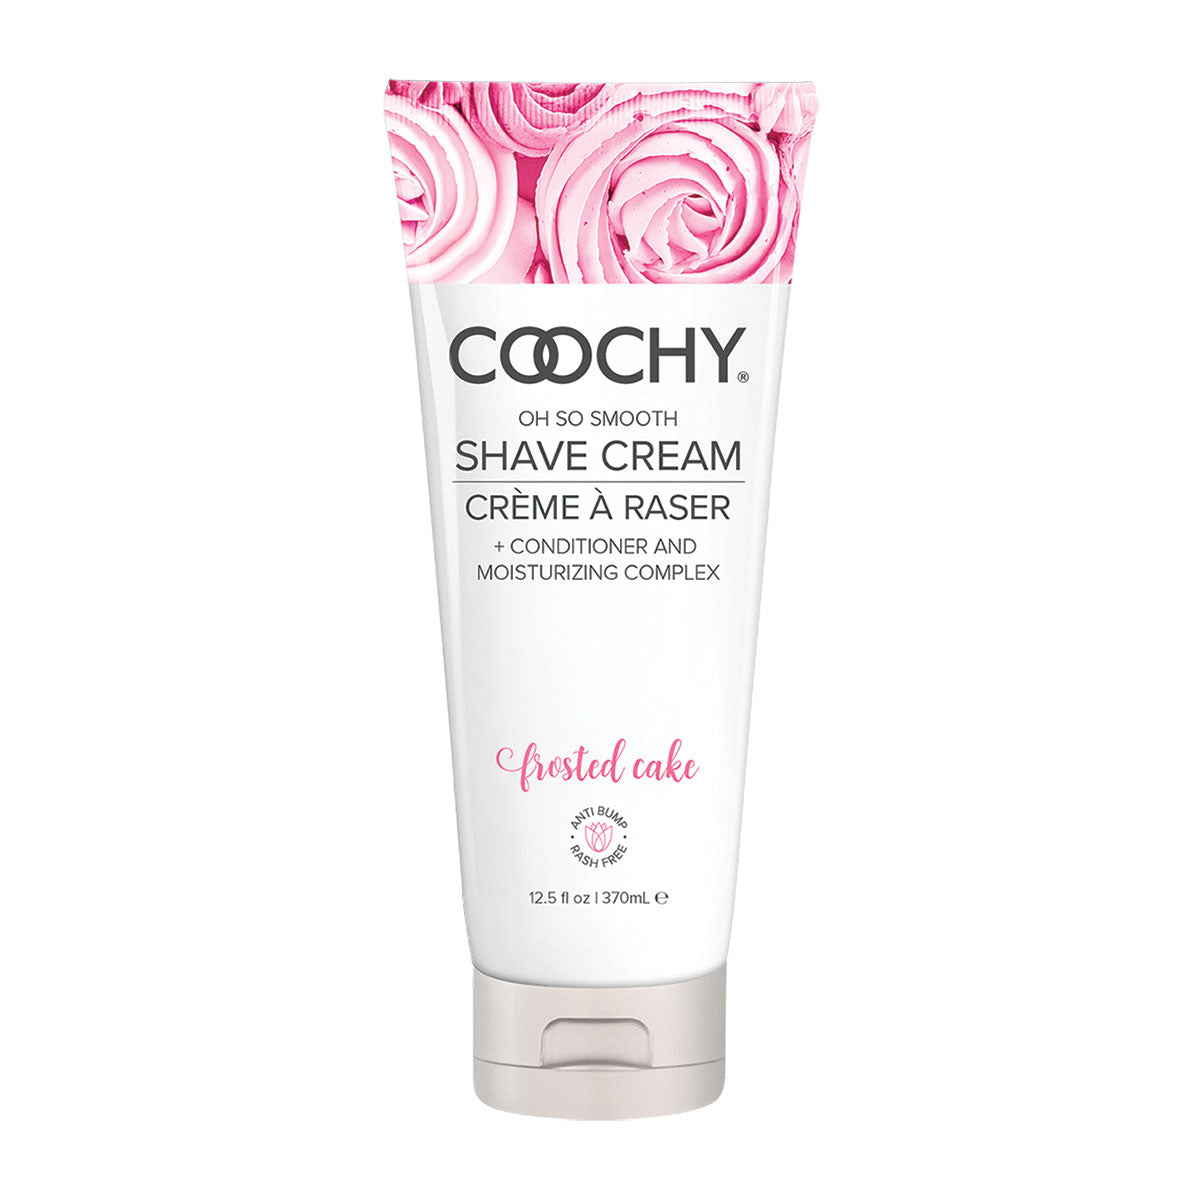 Coochy Shave Cream - 12.5oz - Assorted Scents